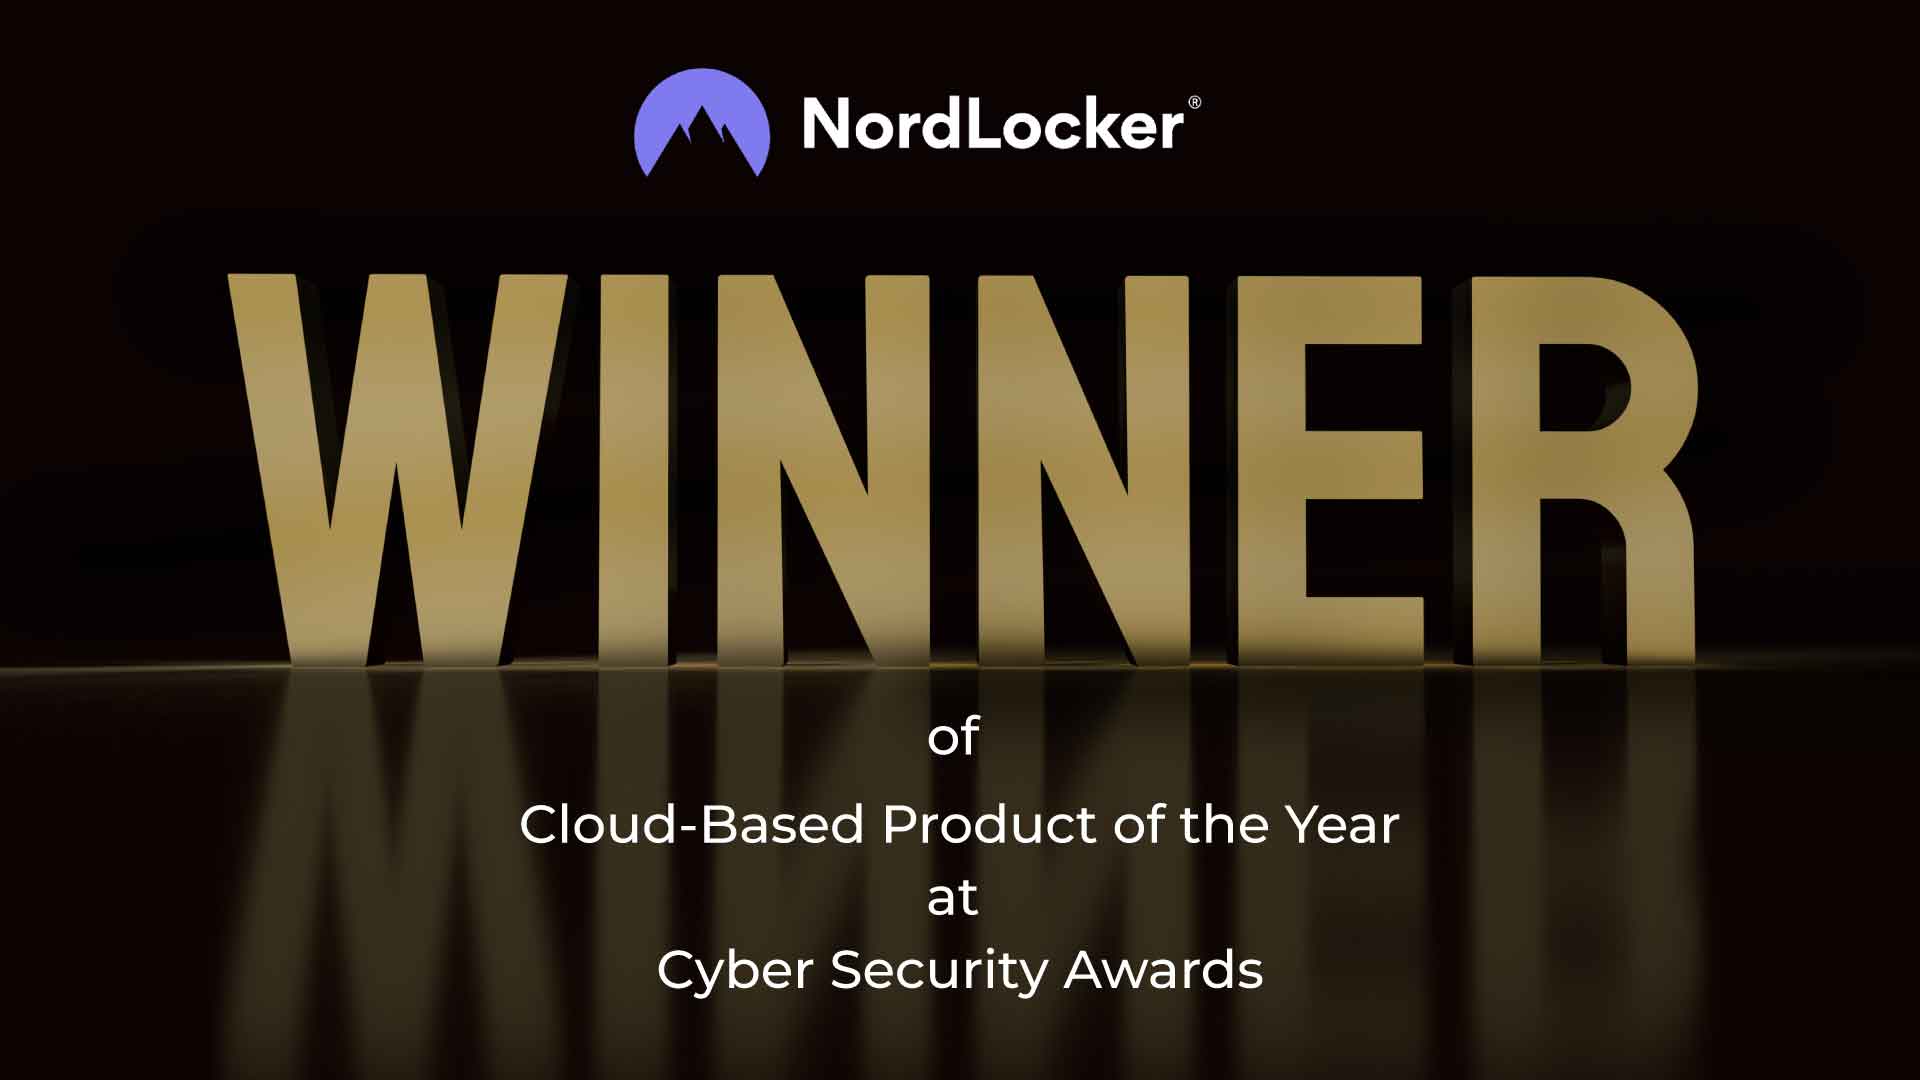 NordLocker wins Cloud-Based Product of the Year at the Cyber Security Awards